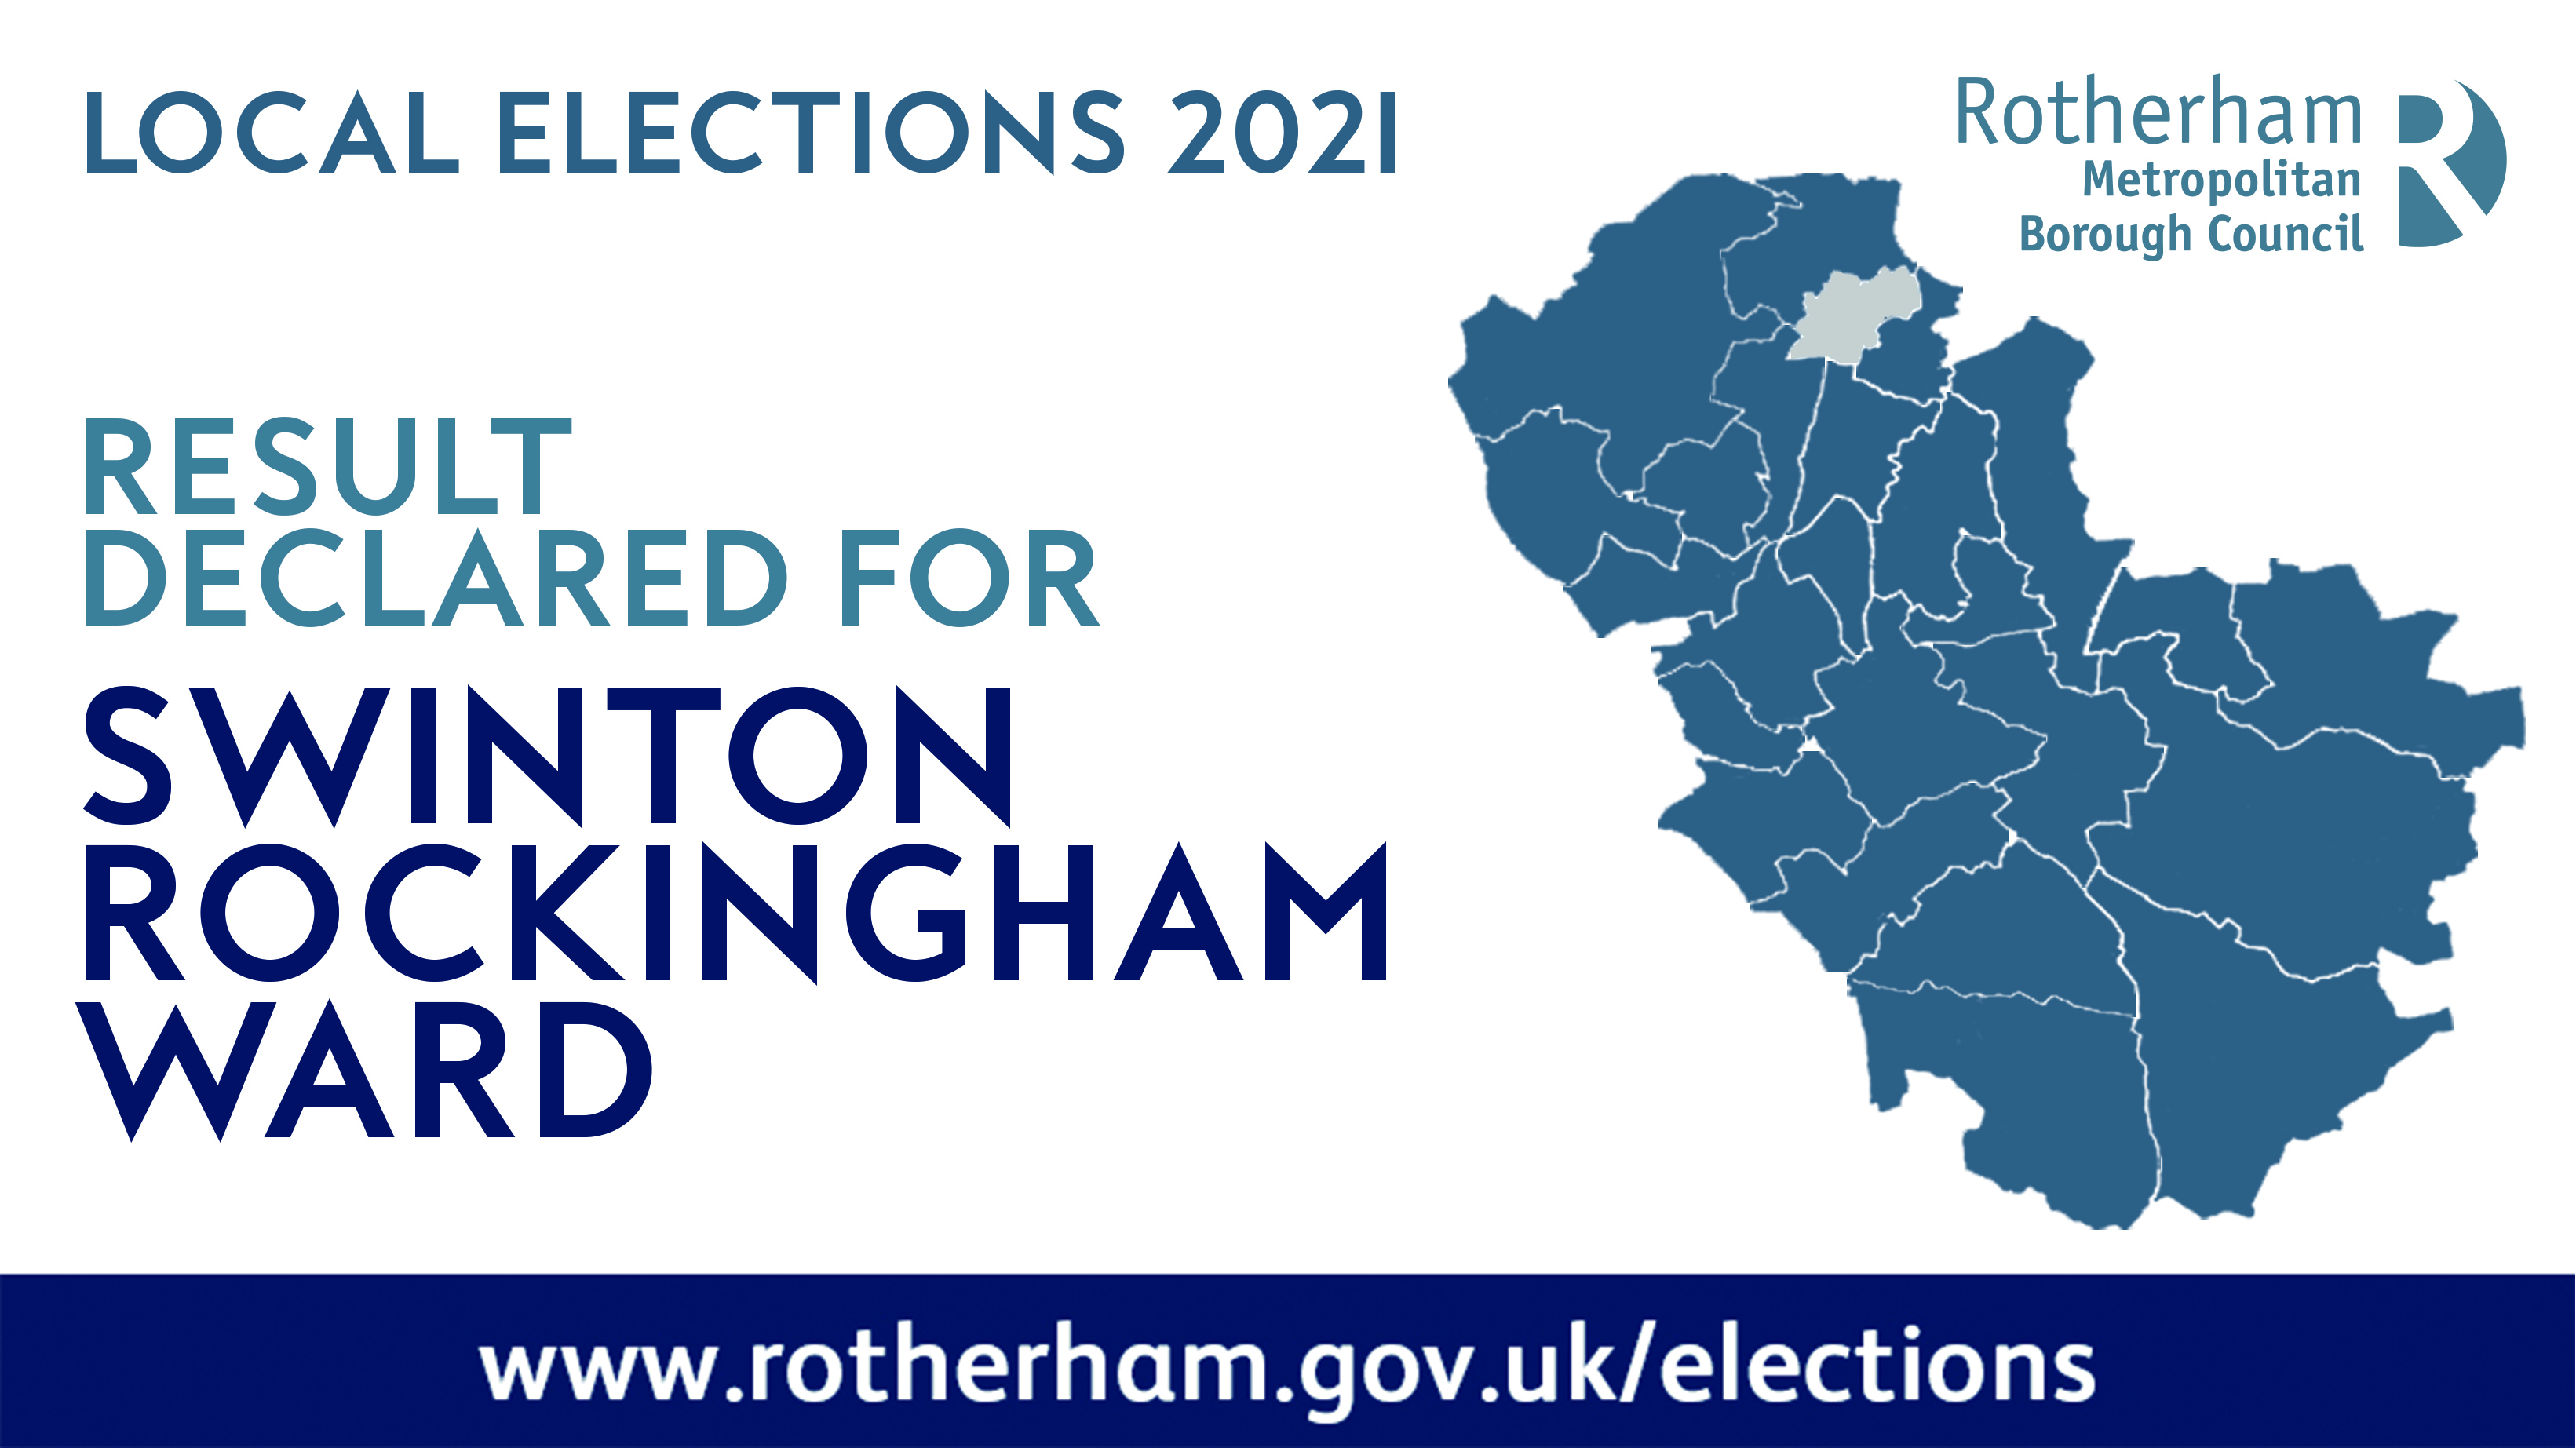 Proposed polling districts and polling places for Swinton rockingham